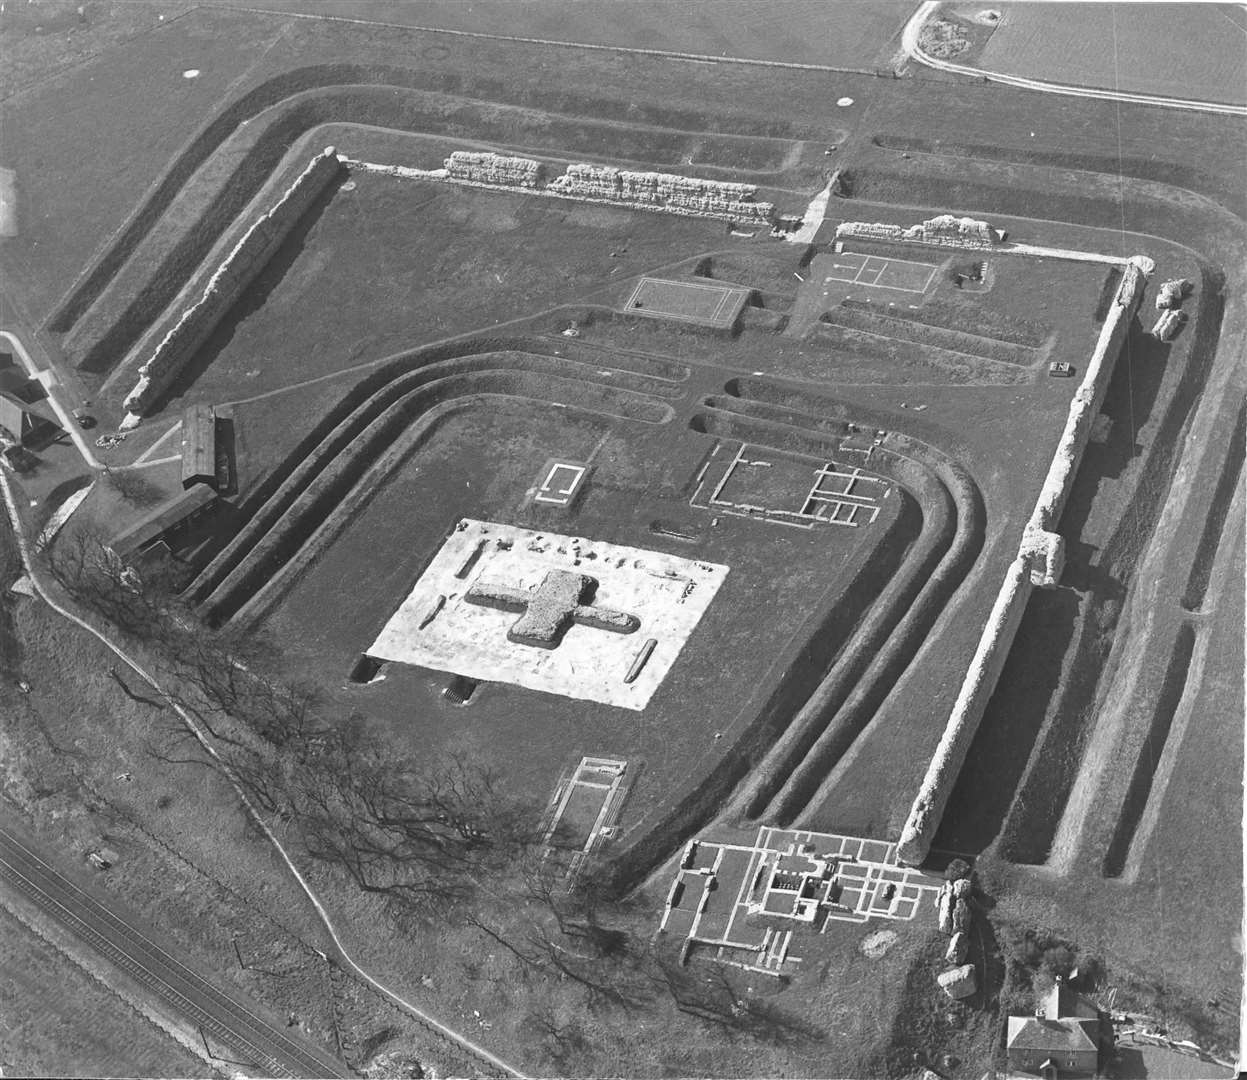 Richborough Roman Fort pictured in 1966